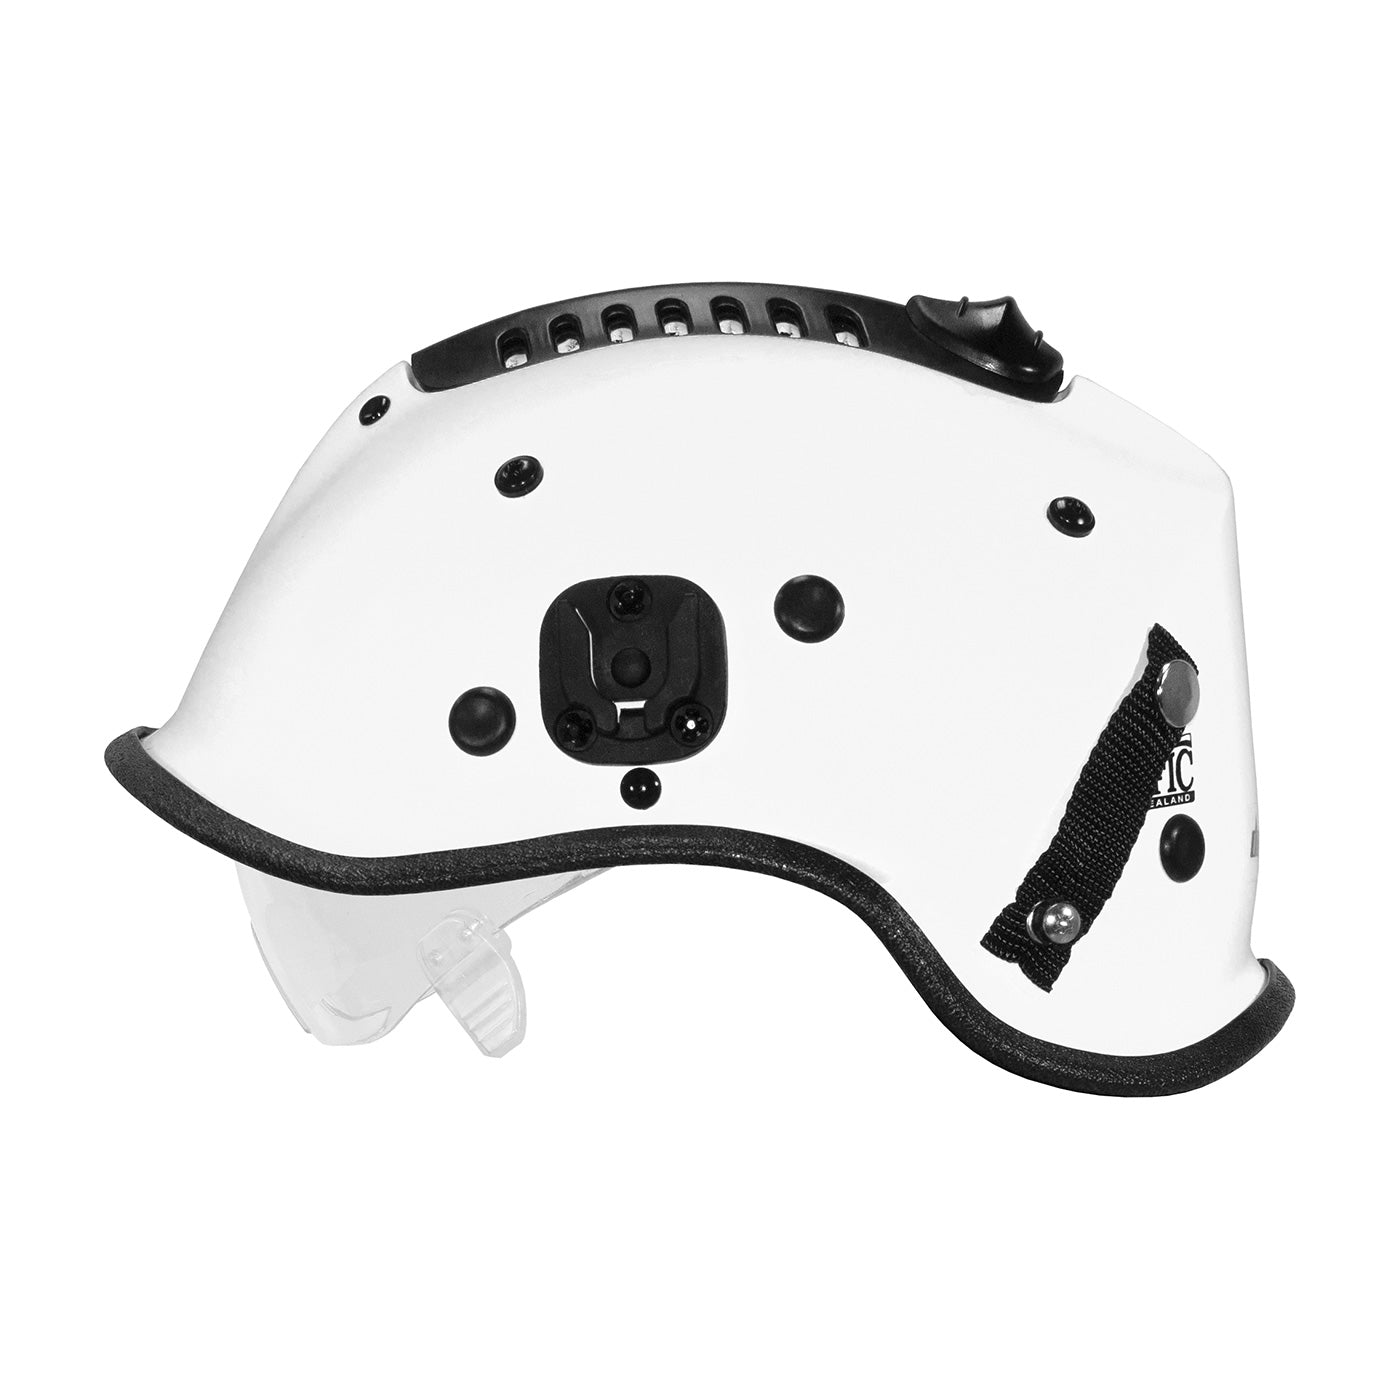 Protective Industrial Products-PACIFIC R6 DOMINATOR HELMET-eSafety Supplies, Inc